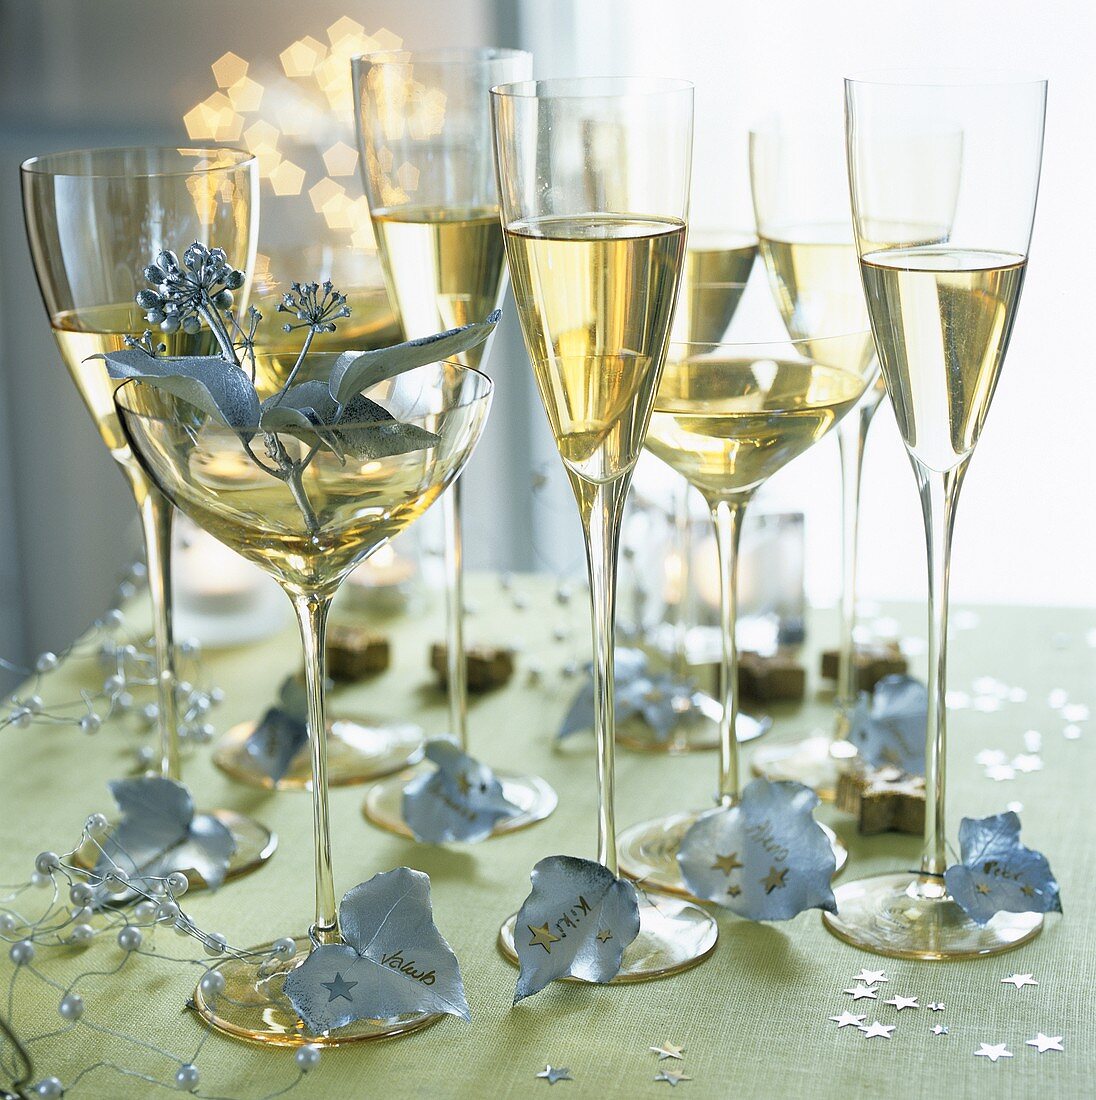 Champagne glasses on a table laid for Christmas